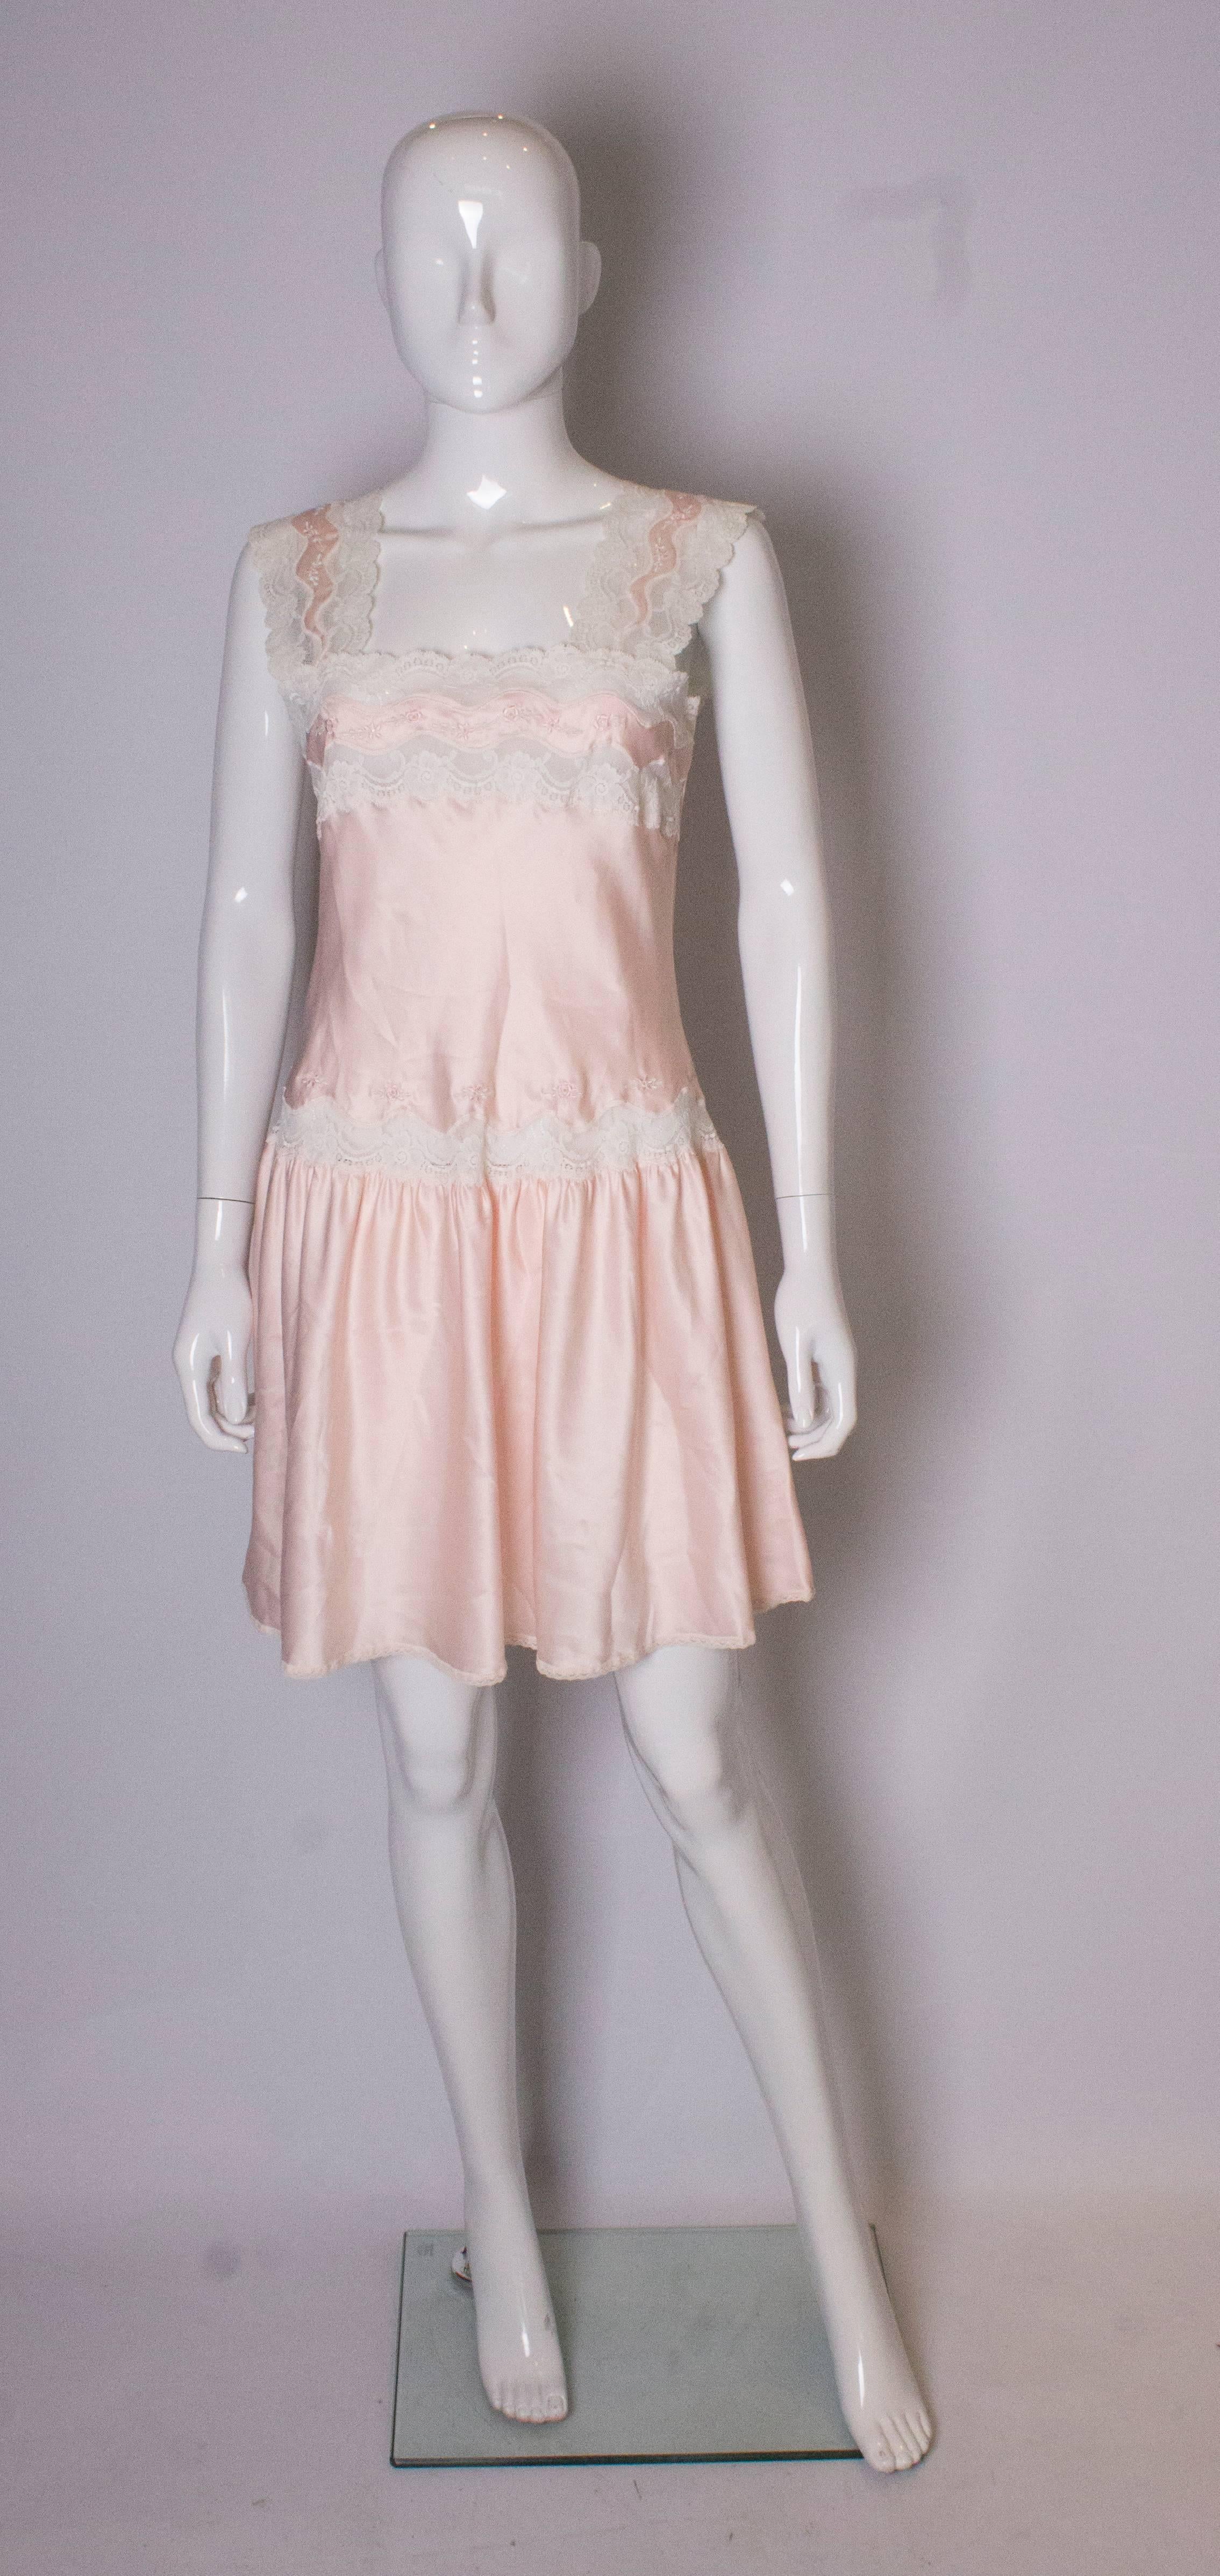 A charming vintage dress ( or nightdress ) by Marks and Spencer. In a pale pink with lace and embroidery trim, the dress has a drop waist and wide shoulders.